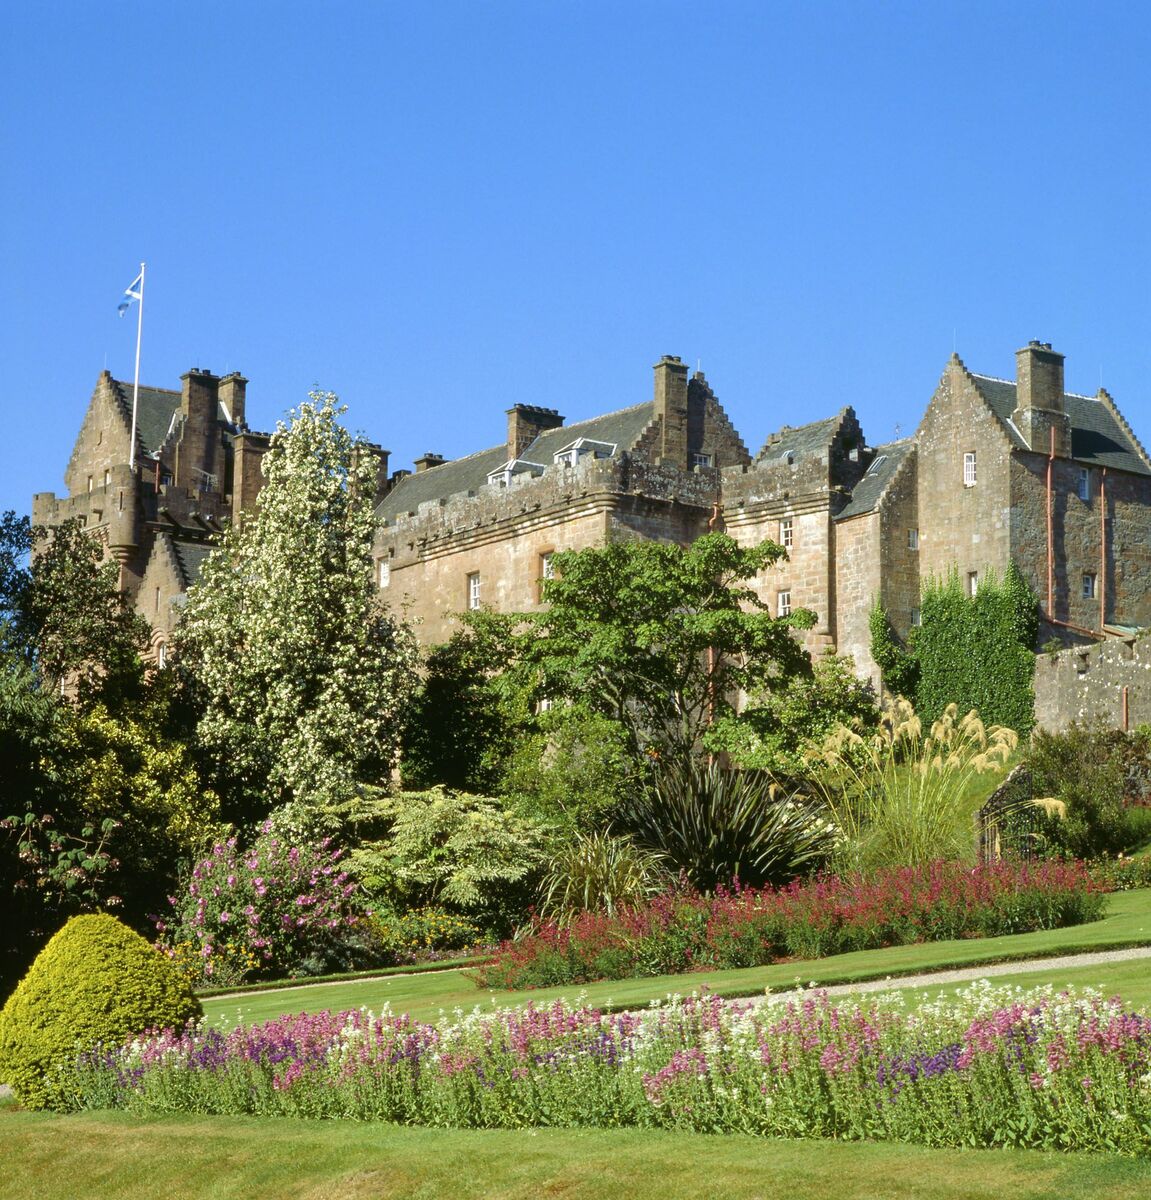 All jobs at Brodick Castle are saved